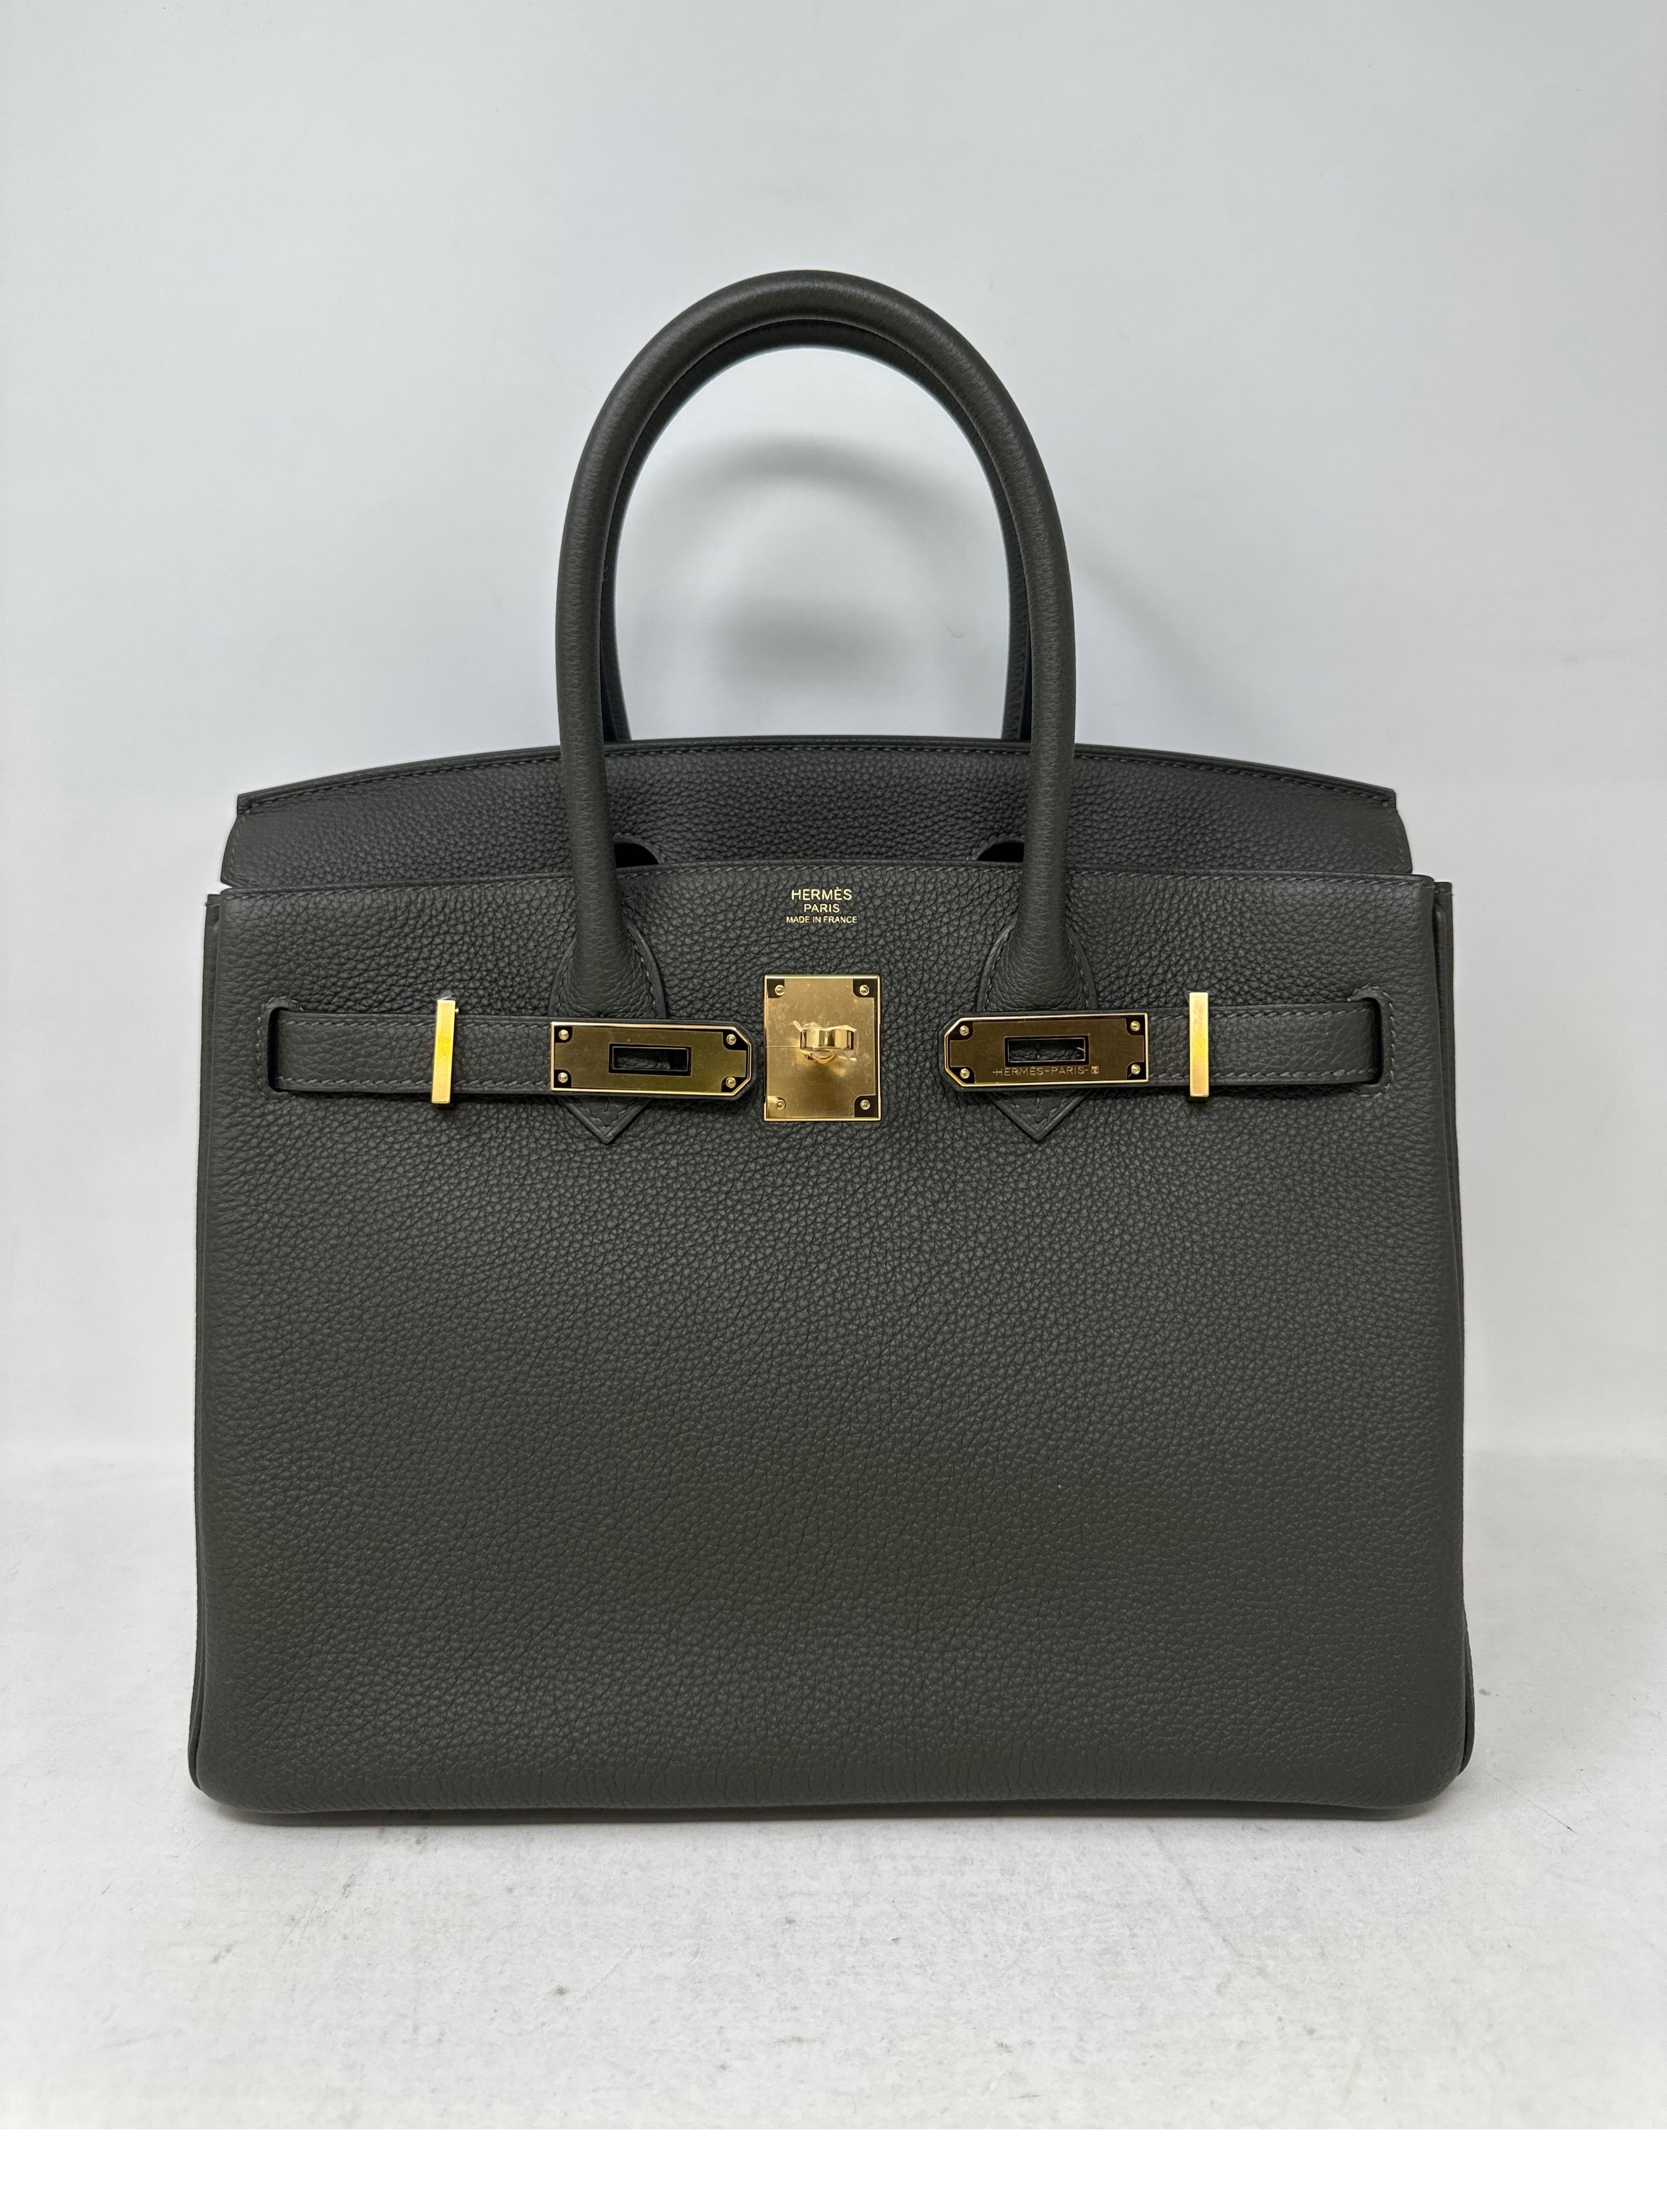 Hermes Vert De Gris Birkin 30 Bag. Togo leather. New never used. Gold hardware. Most wanted size 30 and highly desired Vert grey color. Full set. Includes clochette, lock, keys, and dust bag. Guaranteed authentic. Gorgeous bag. Don't miss out on